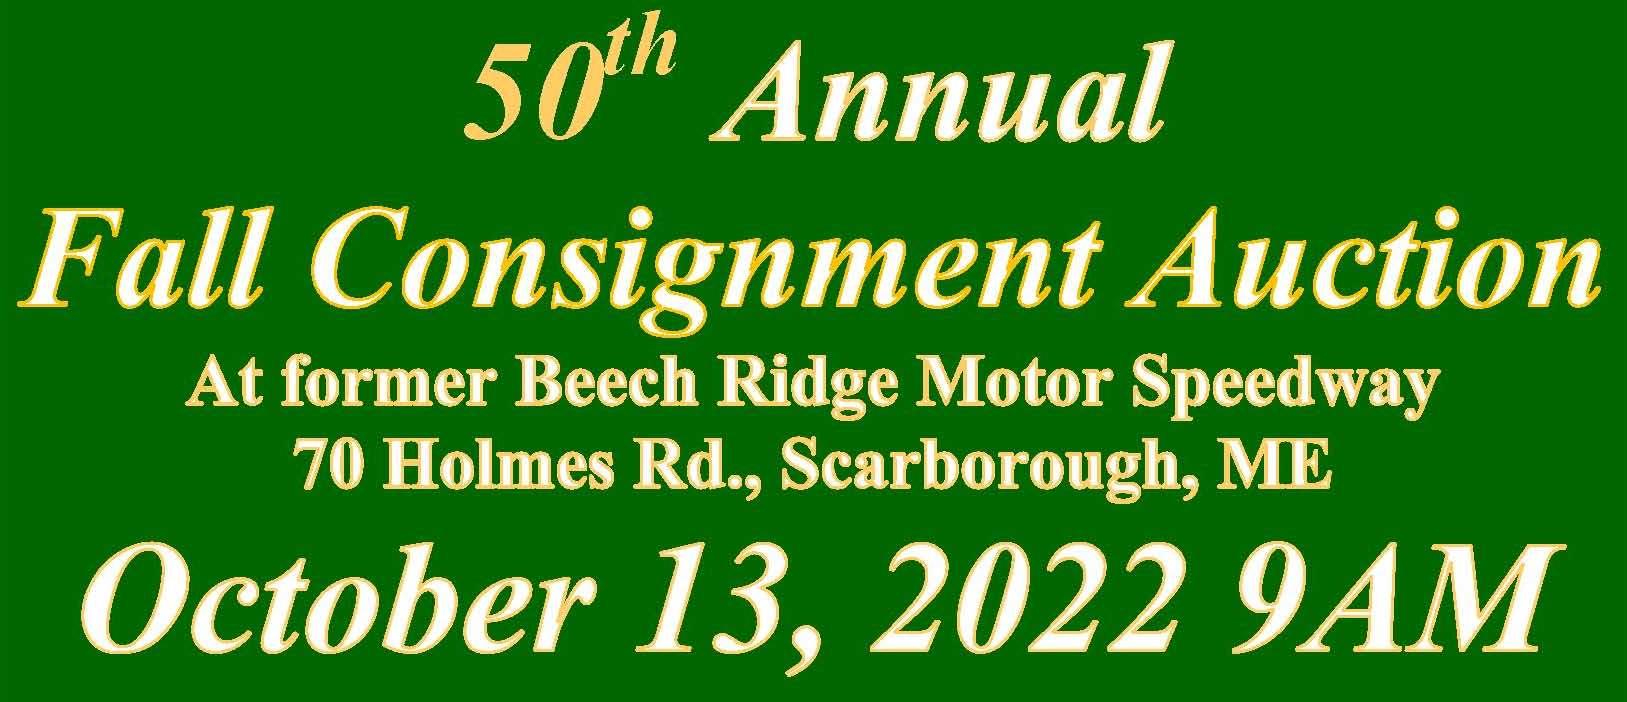 50TH ANNUAL FALL CONSIGNMENT AUCTION Auction